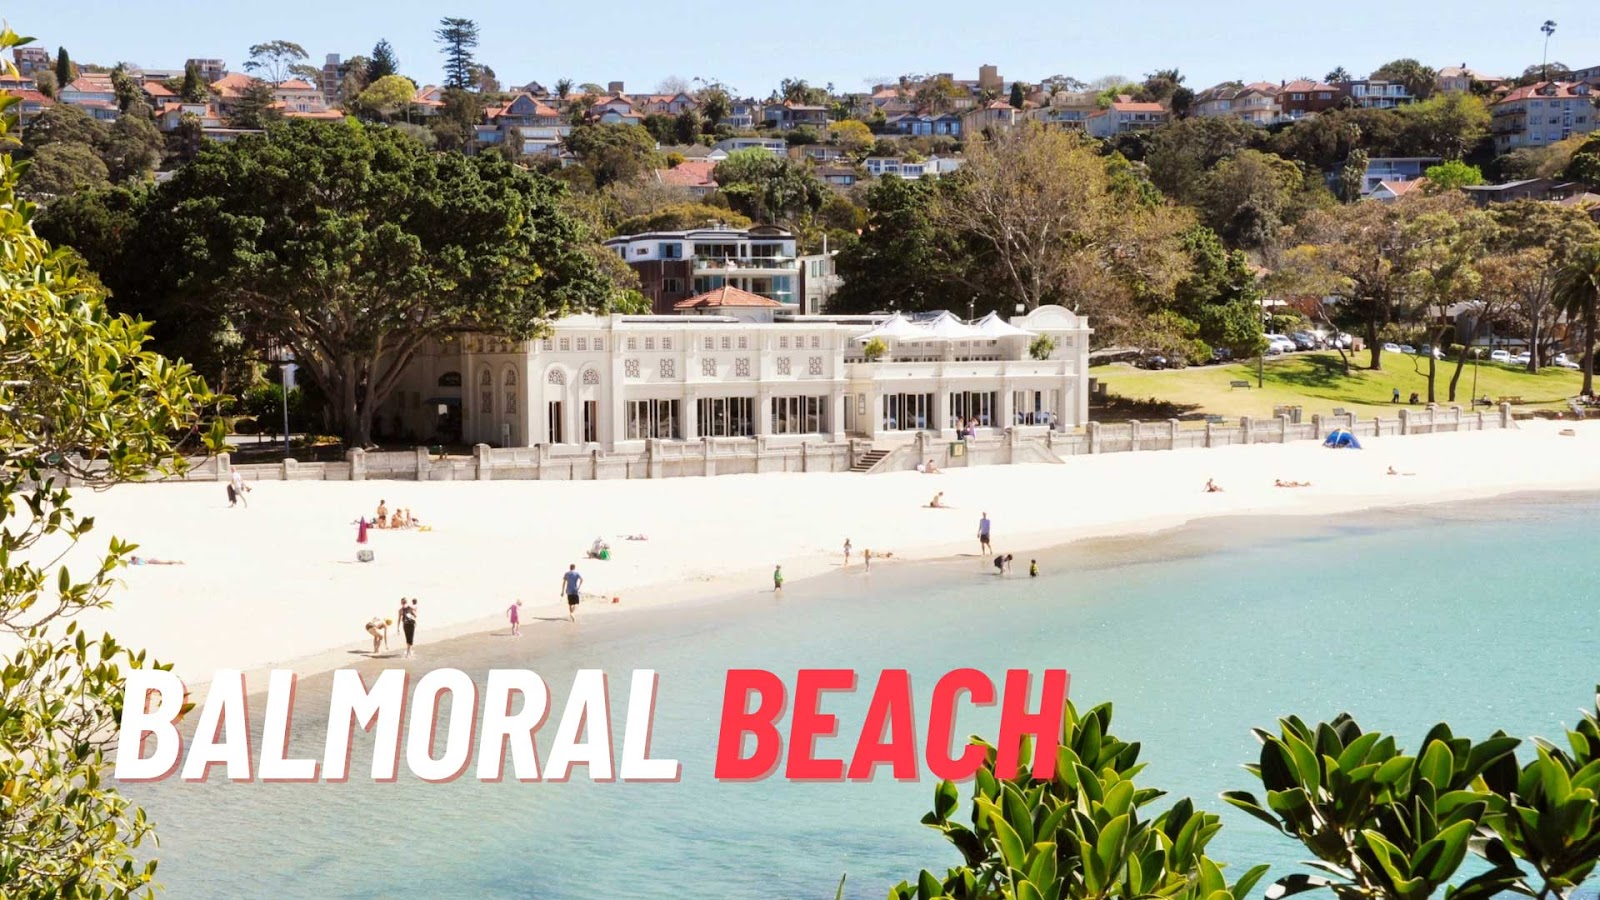 Balmoral Beach is The Best Beach To Collect Shells In Sydney